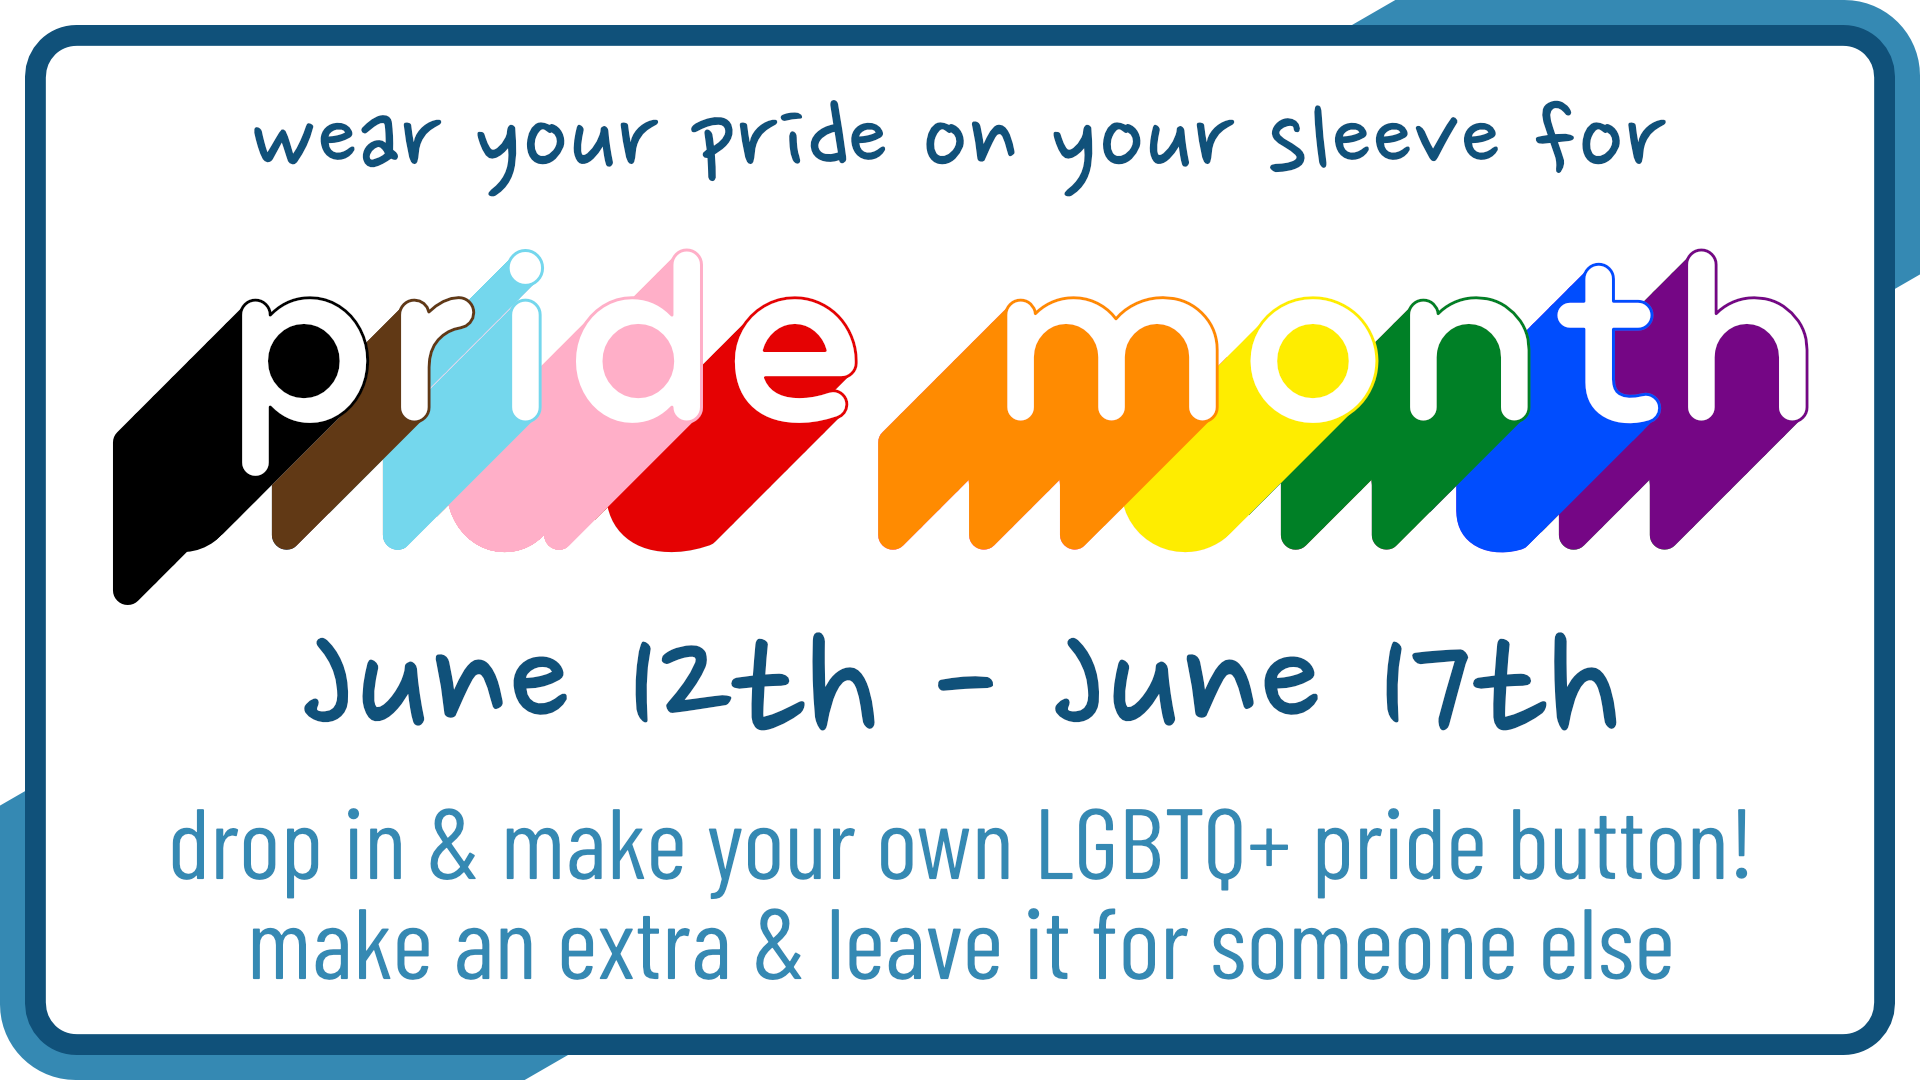 Make your own LGBTQ+ pride button in our teen area, June 12th through June 17th